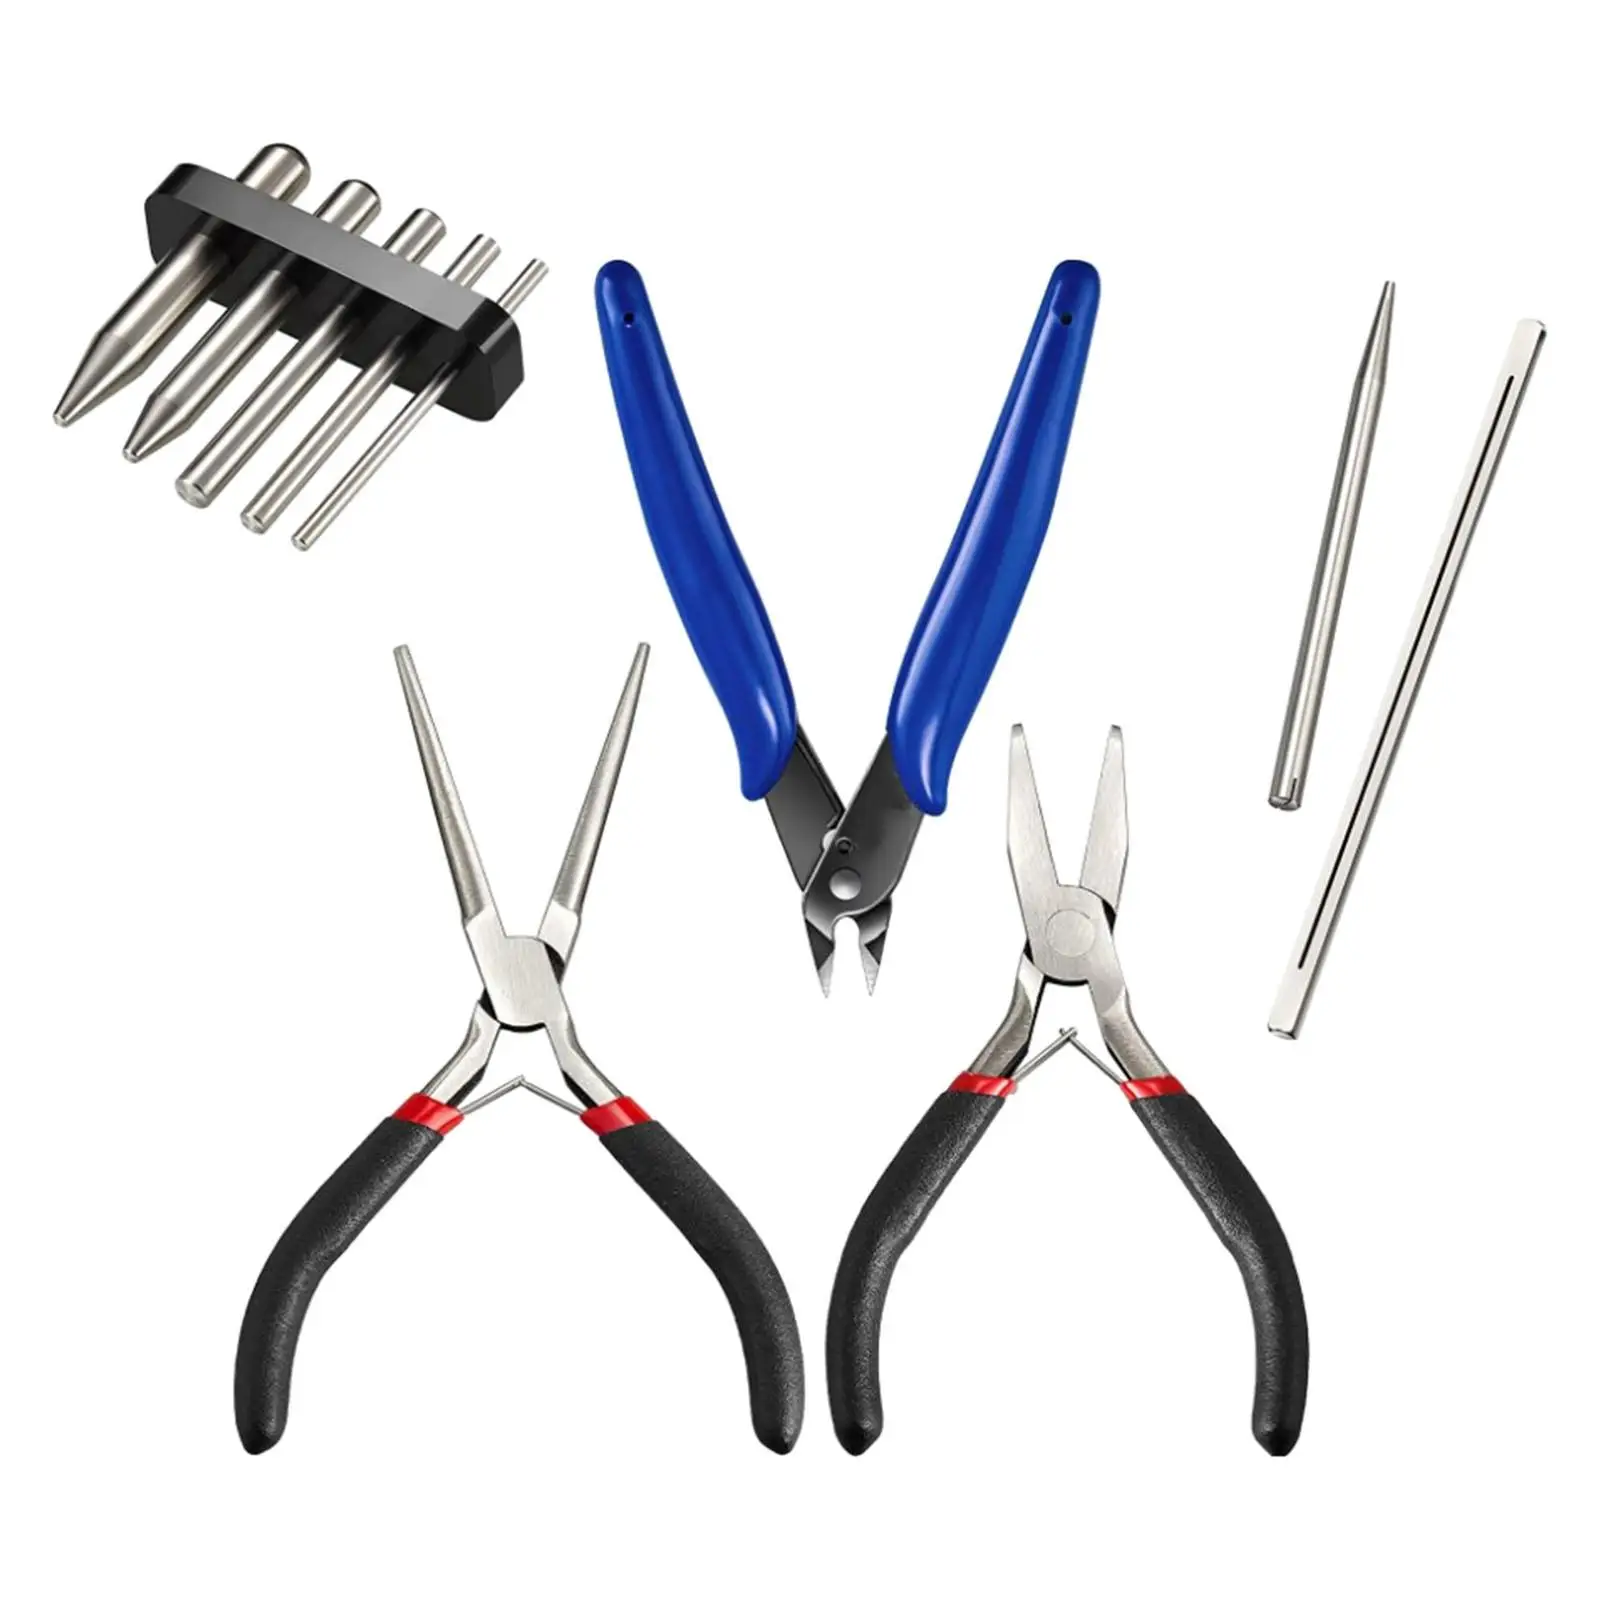 10x Model Kits Tool Hand Tool Plier Nipper Tool for Puzzles Laboratory Work DIY 3D